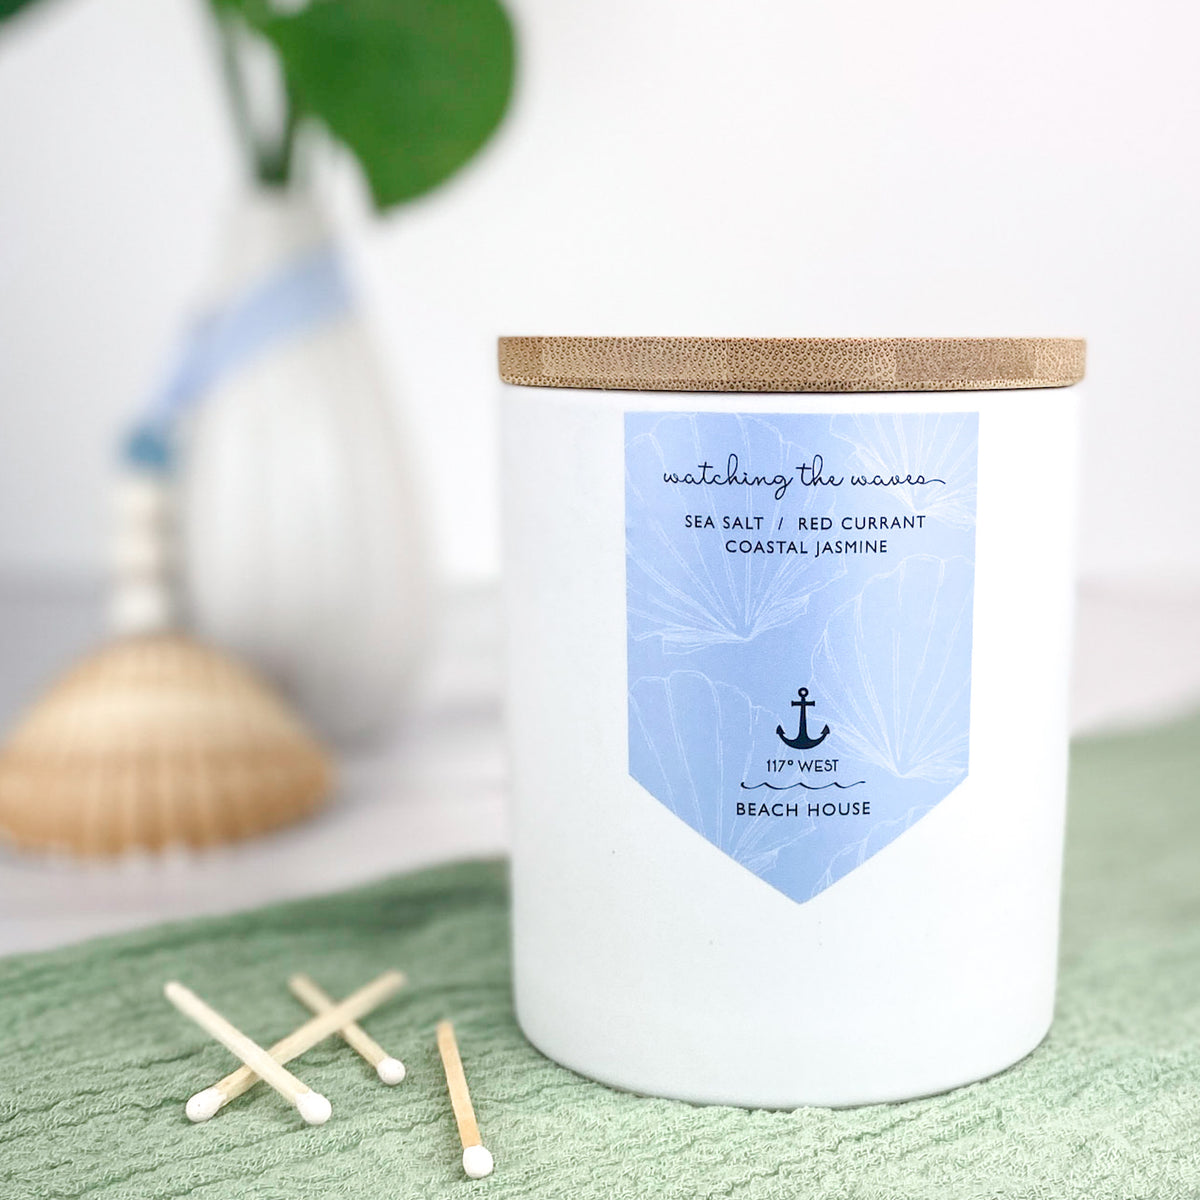 BEACH HOUSE CANDLES- 12 oz ceramic with natural wax